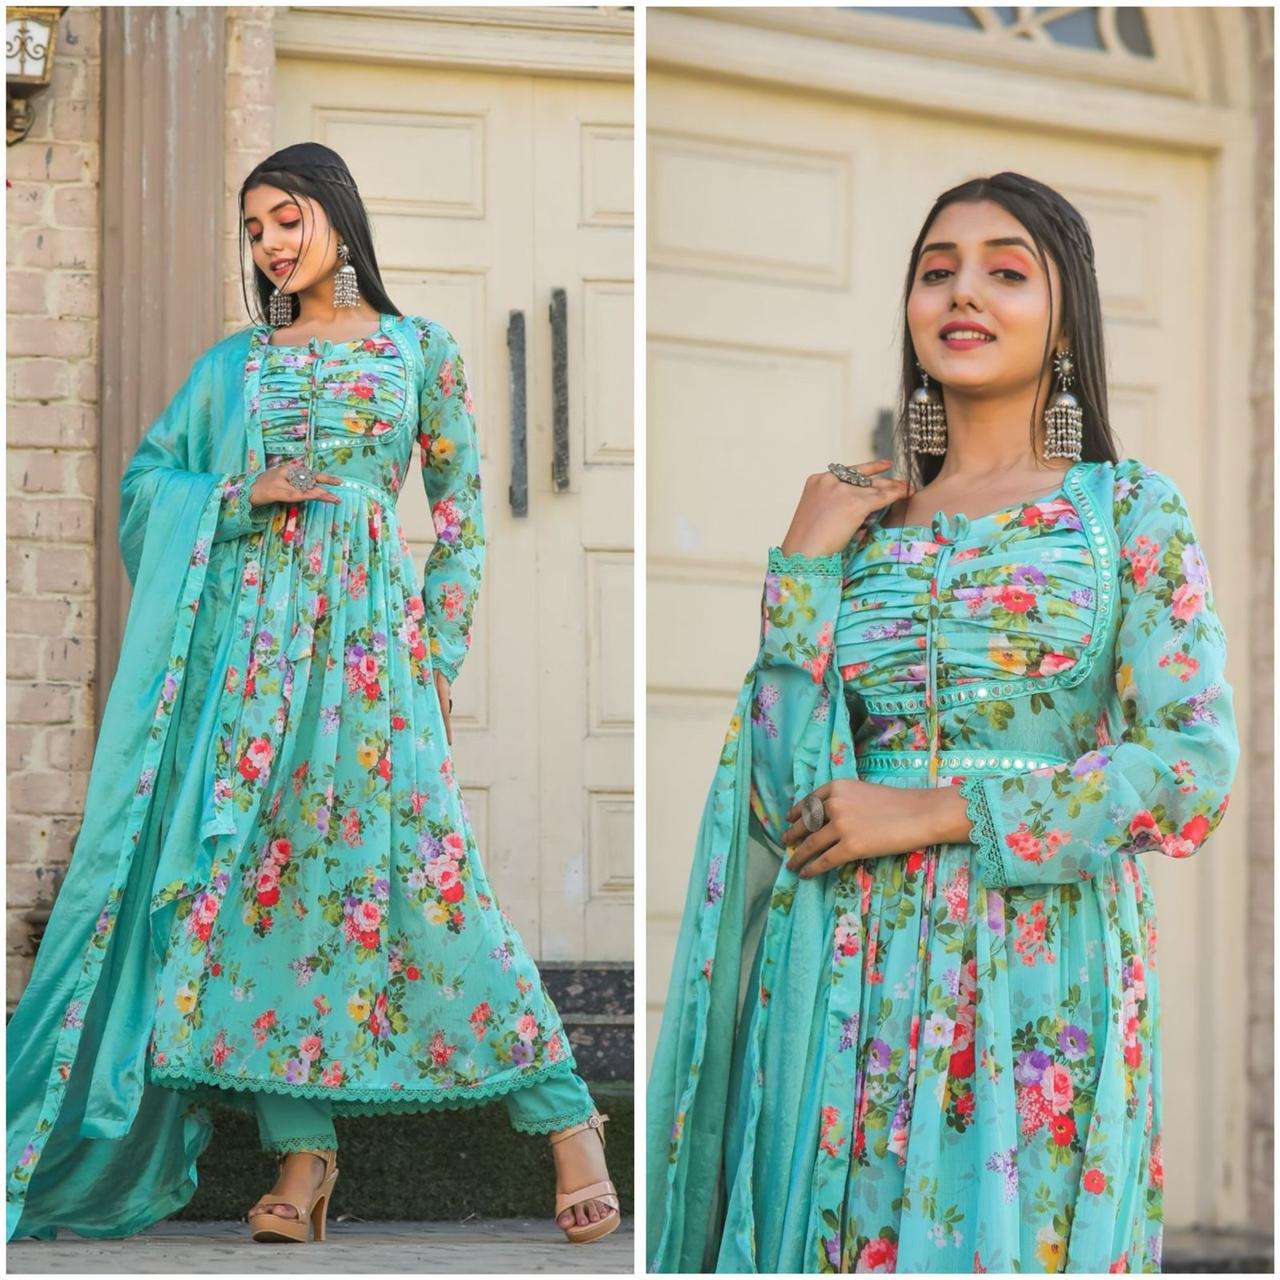 new sp ramdan collecion inn multicoloured anarkali with mirror work and print lace readymade dresses aliacut nairacut readymade dresses collection in colour variety 